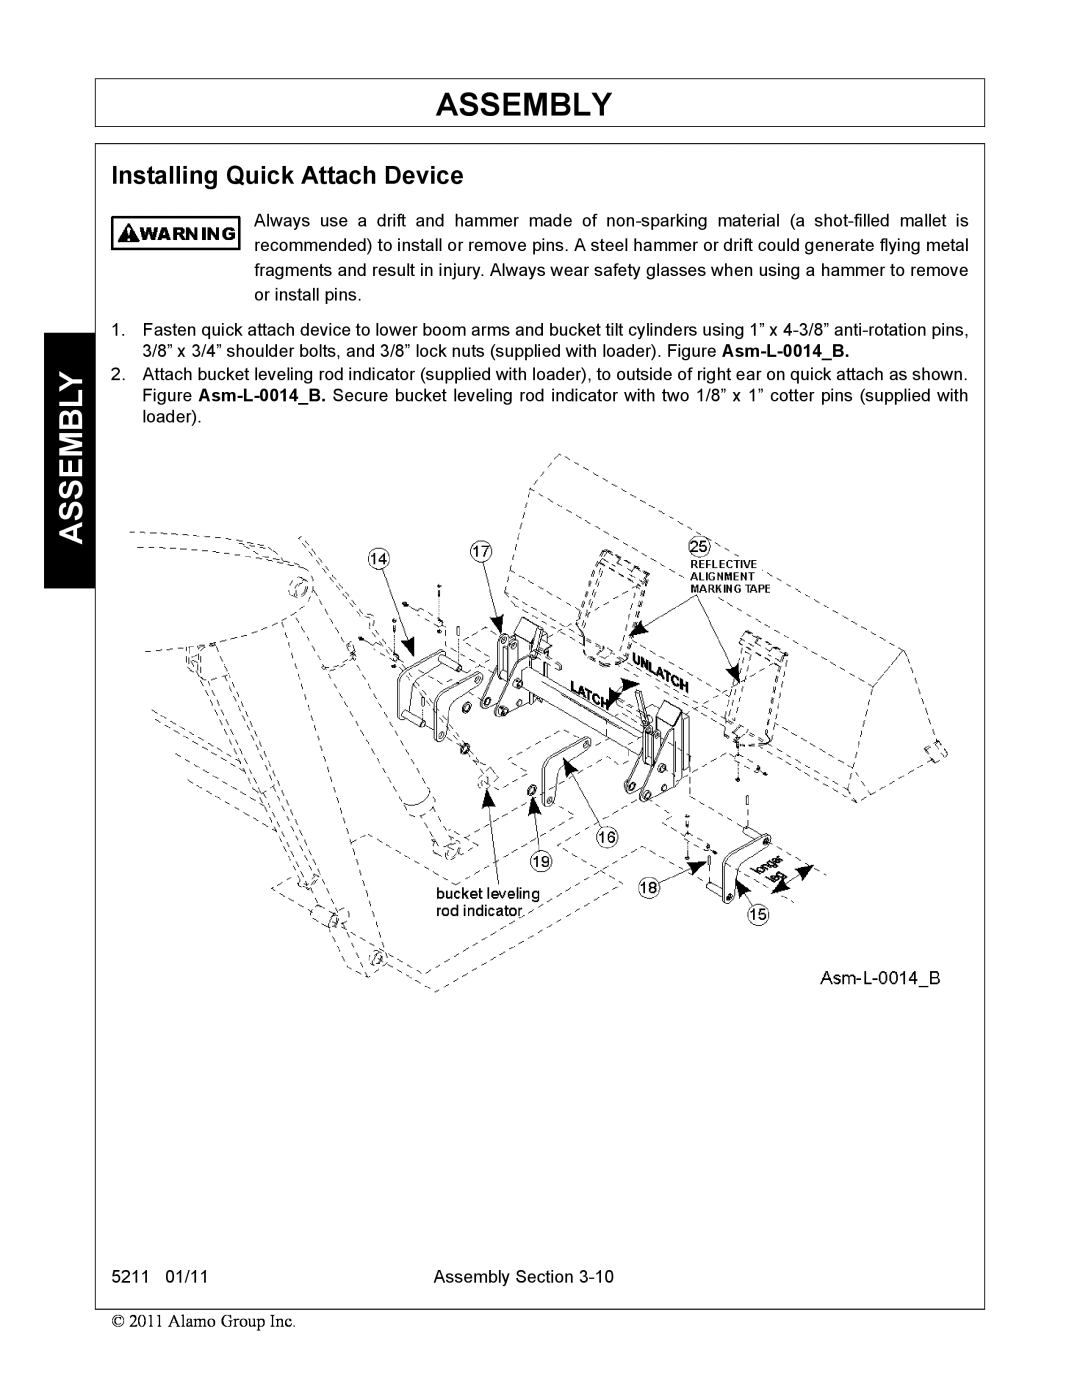 Servis-Rhino 5211 manual Assembly, Installing Quick Attach Device 